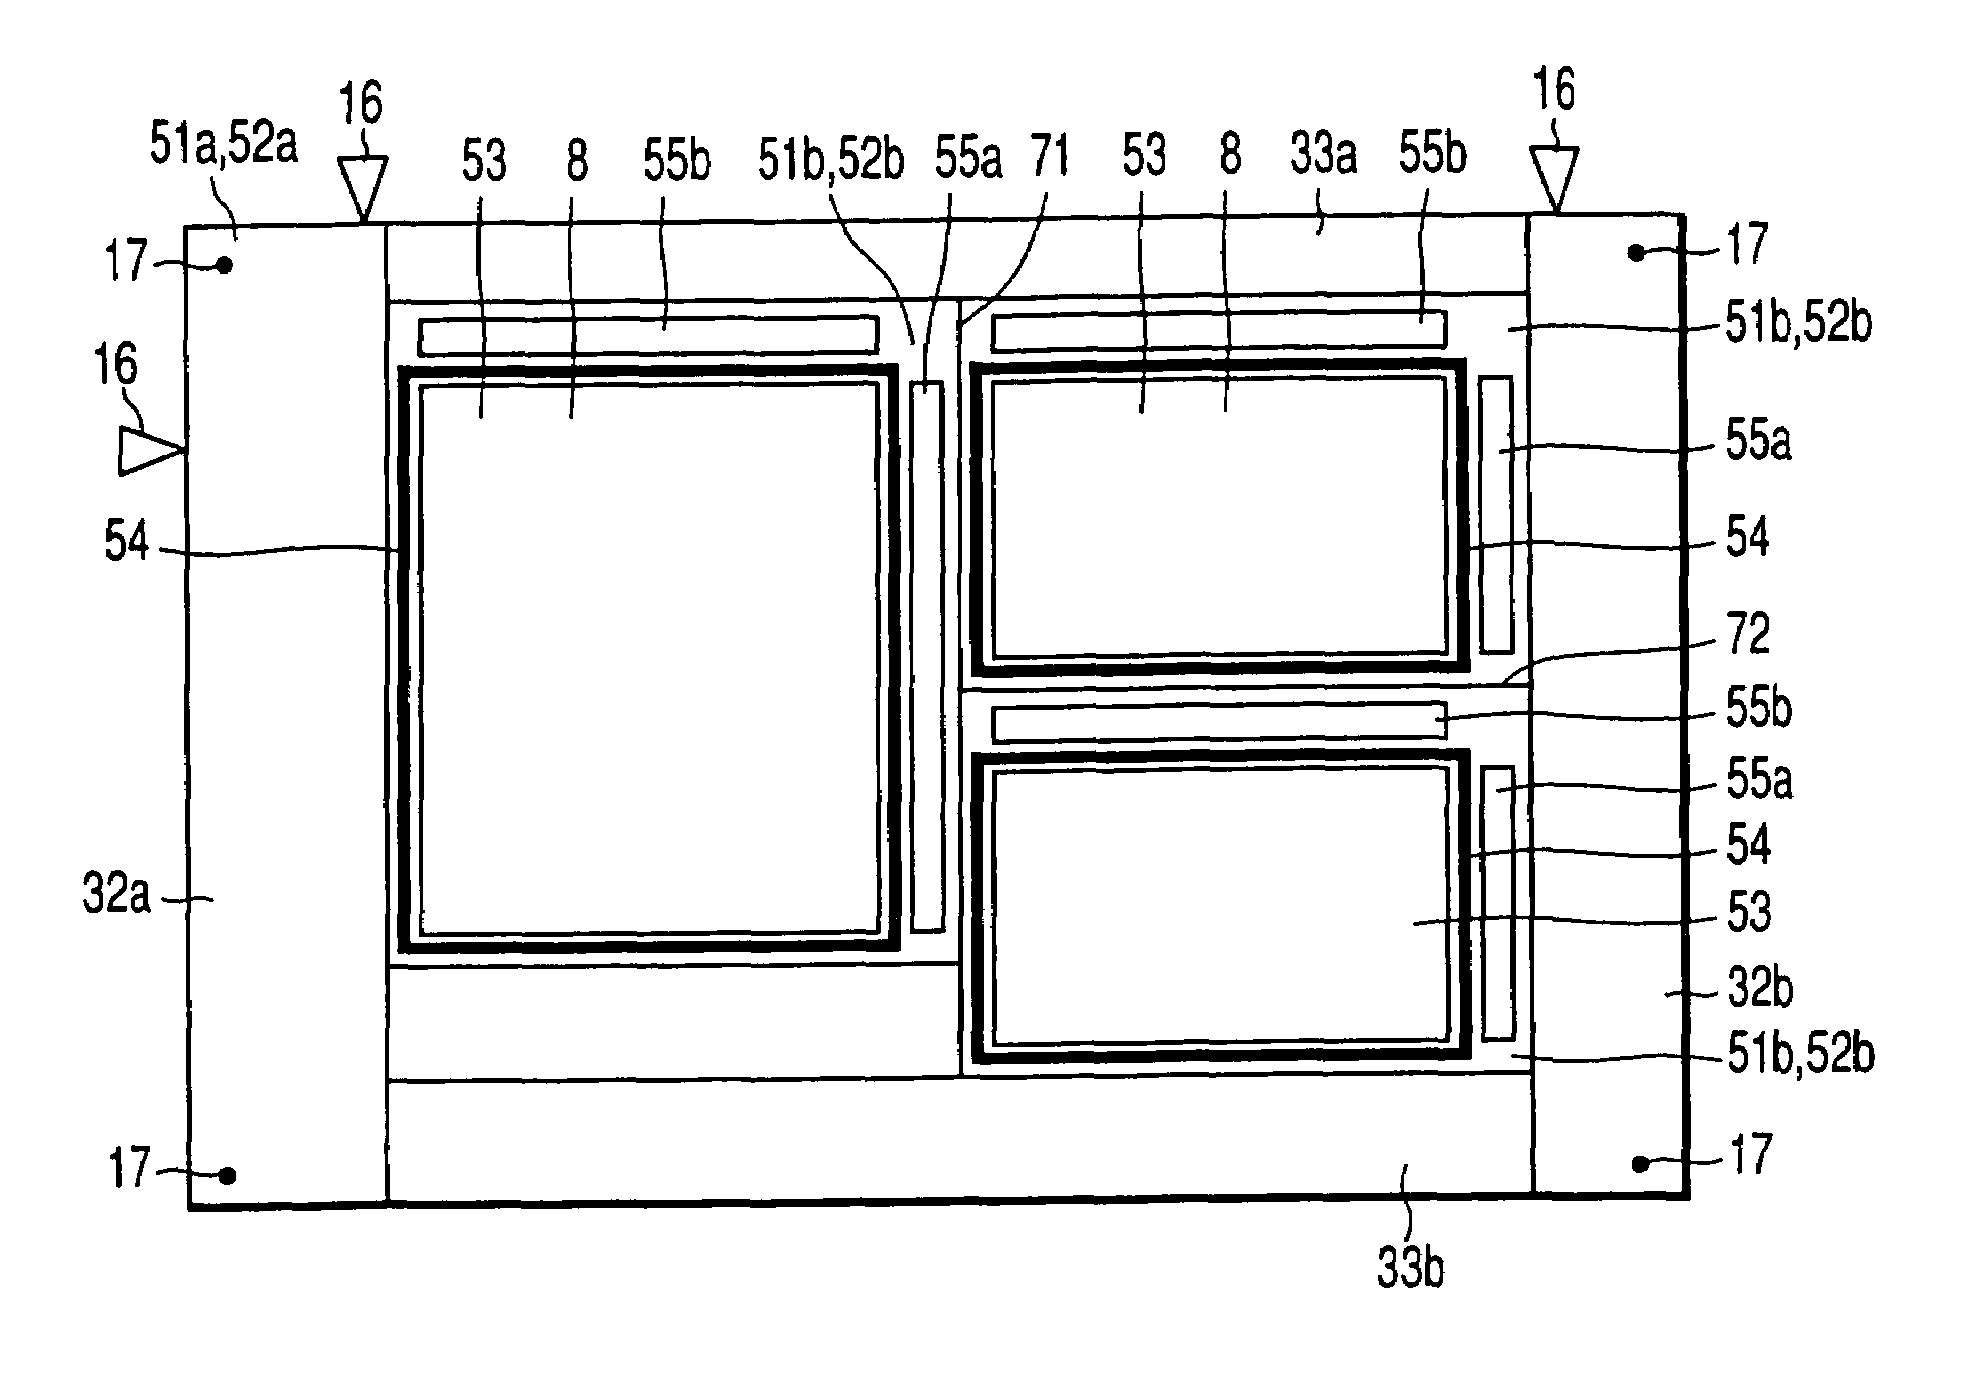 Method of manufacturing flat display panels of different sizes from a common base substrate